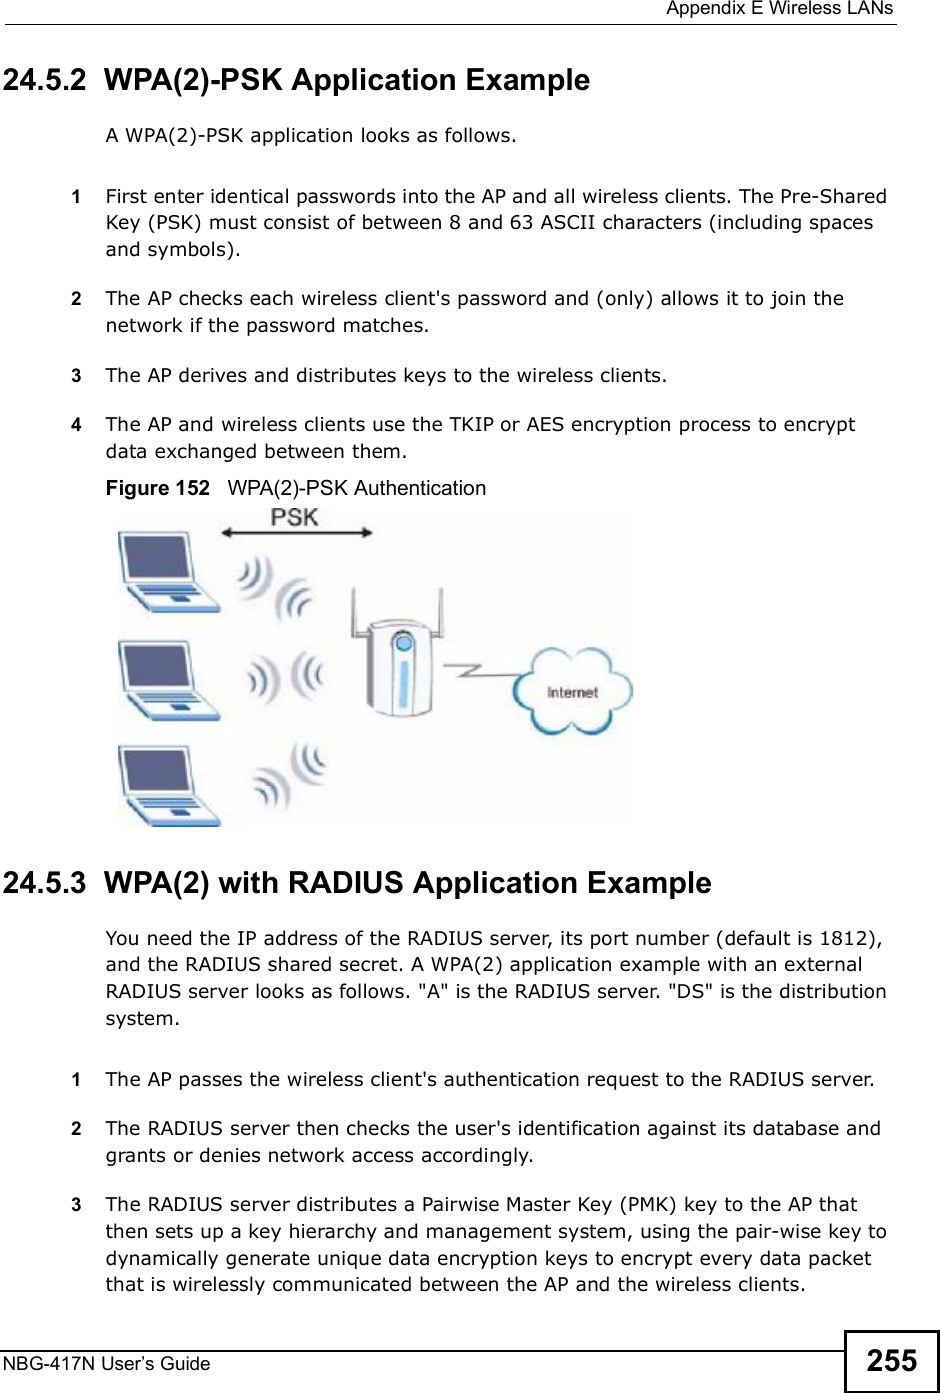  Appendix EWireless LANsNBG-417N User s Guide 25524.5.2  WPA(2)-PSK Application ExampleA WPA(2)-PSK application looks as follows.1First enter identical passwords into the AP and all wireless clients. The Pre-Shared Key (PSK) must consist of between 8 and 63 ASCII characters (including spaces and symbols).2The AP checks each wireless client&apos;s password and (only) allows it to join the network if the password matches.3The AP derives and distributes keys to the wireless clients.4The AP and wireless clients use the TKIP or AES encryption process to encrypt data exchanged between them.Figure 152   WPA(2)-PSK Authentication24.5.3  WPA(2) with RADIUS Application ExampleYou need the IP address of the RADIUS server, its port number (default is 1812), and the RADIUS shared secret. A WPA(2) application example with an external RADIUS server looks as follows. &quot;A&quot; is the RADIUS server. &quot;DS&quot; is the distribution system.1The AP passes the wireless client&apos;s authentication request to the RADIUS server.2The RADIUS server then checks the user&apos;s identification against its database and grants or denies network access accordingly.3The RADIUS server distributes a Pairwise Master Key (PMK) key to the AP that then sets up a key hierarchy and management system, using the pair-wise key to dynamically generate unique data encryption keys to encrypt every data packet that is wirelessly communicated between the AP and the wireless clients. 